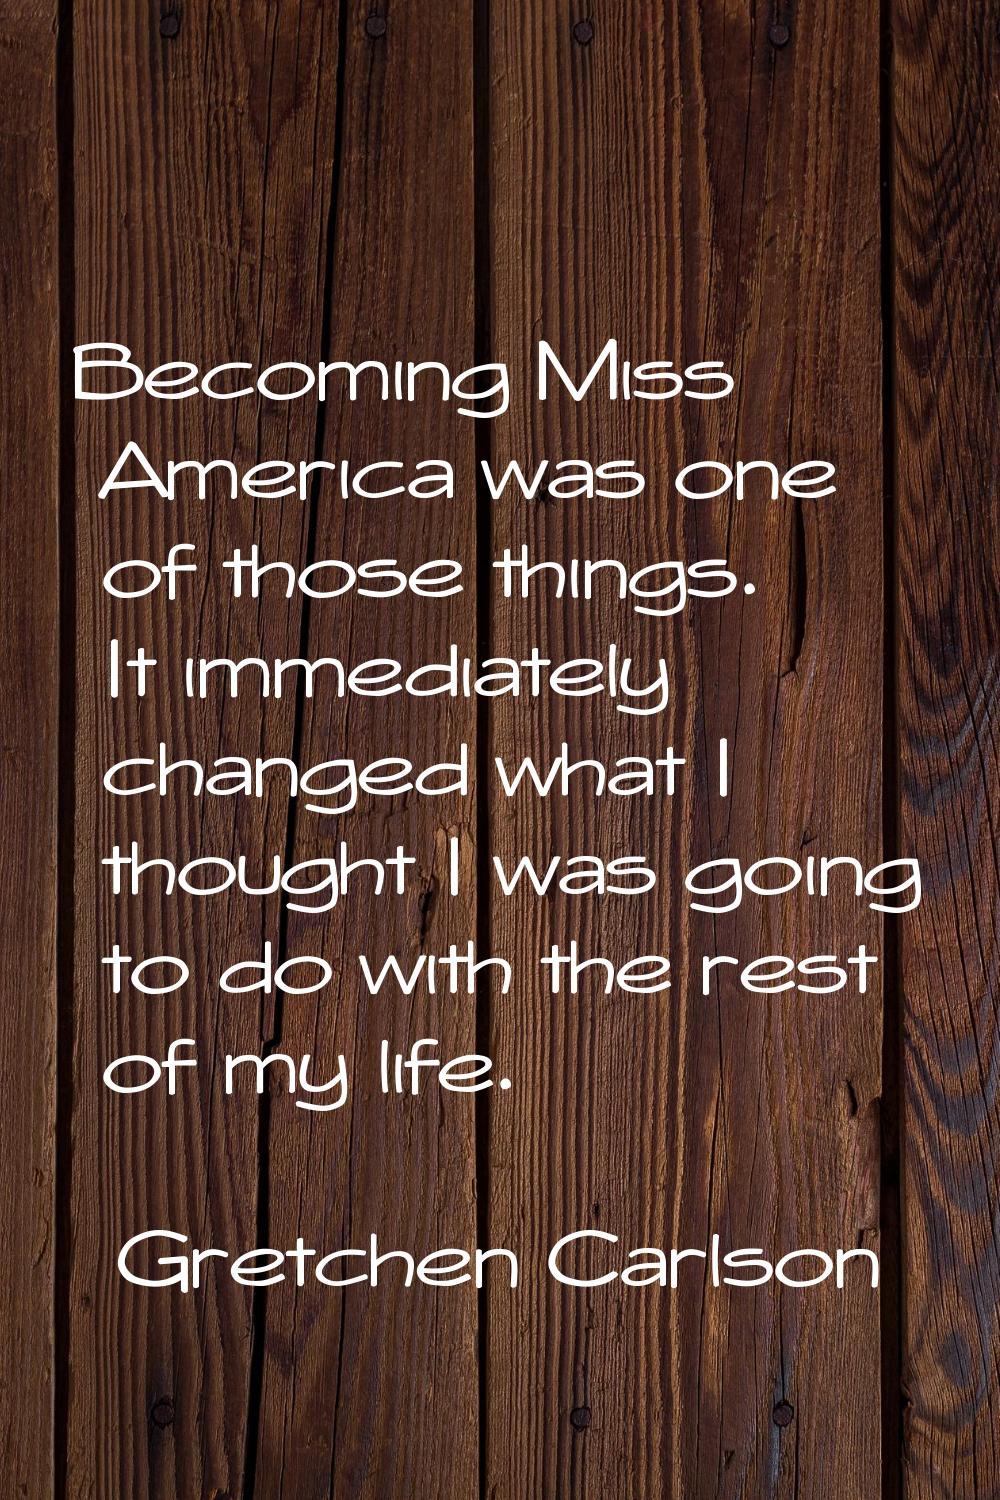 Becoming Miss America was one of those things. It immediately changed what I thought I was going to